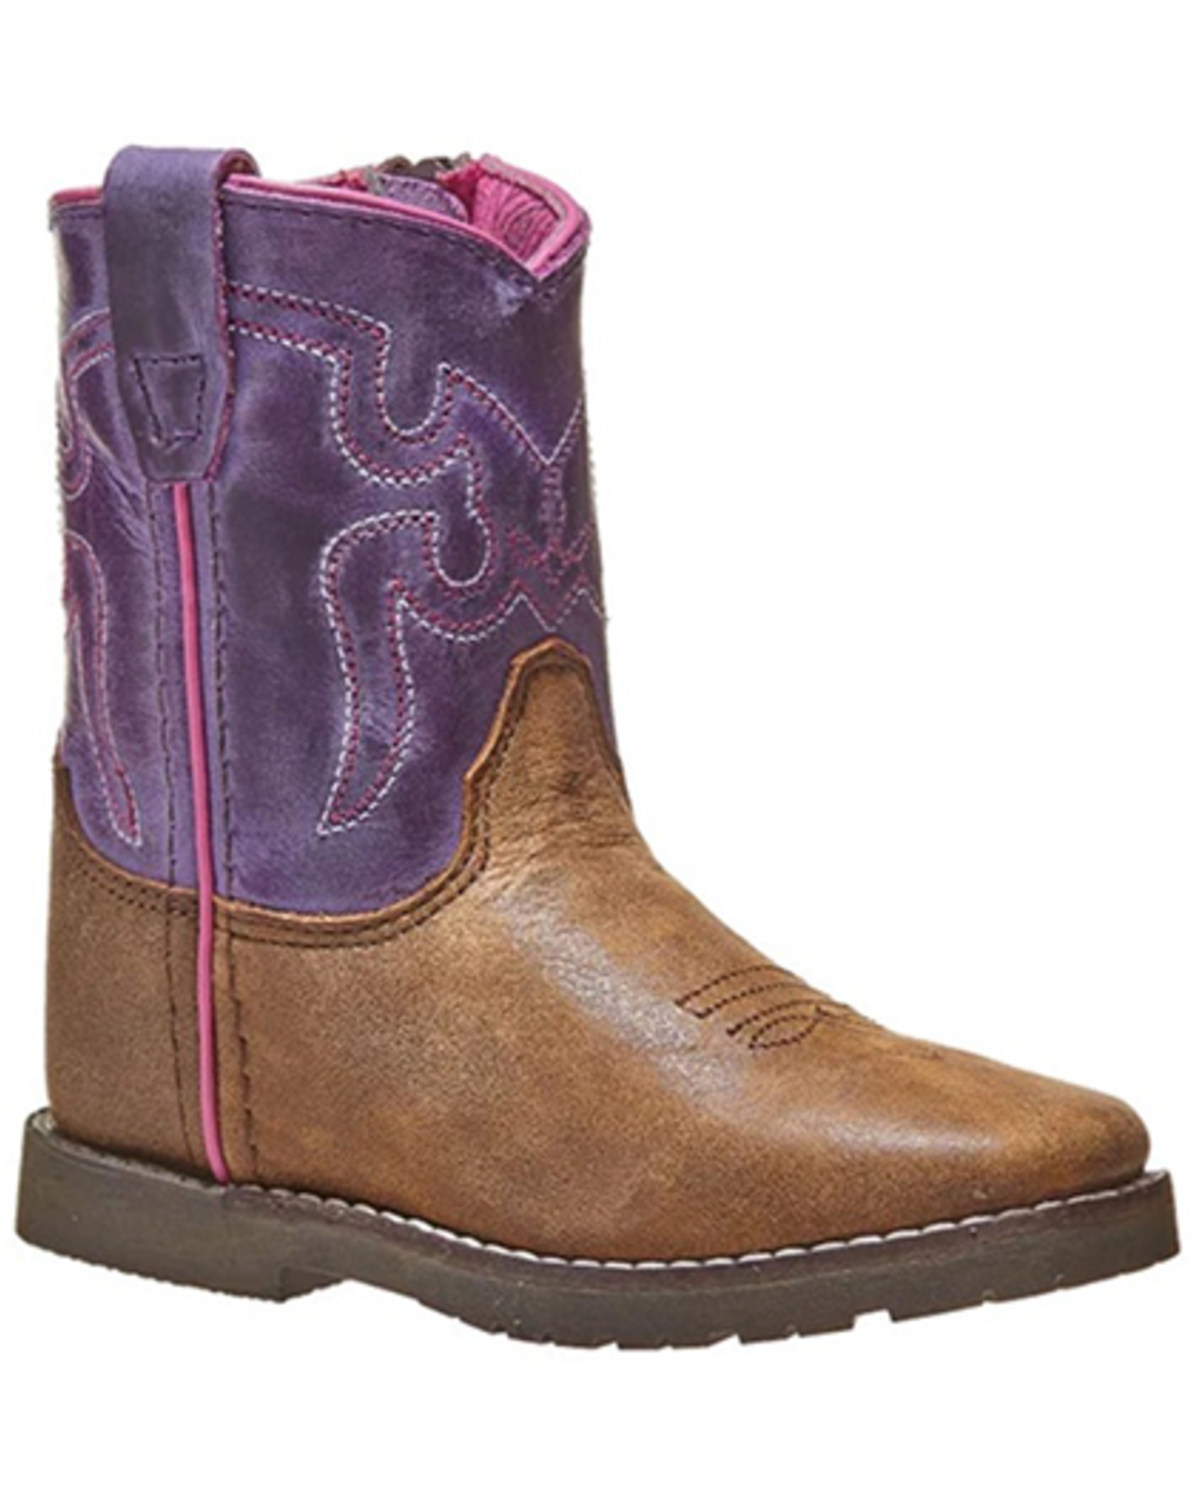 Smoky Mountain Toddler Girls' Autry Western Boots - Broad Square Toe